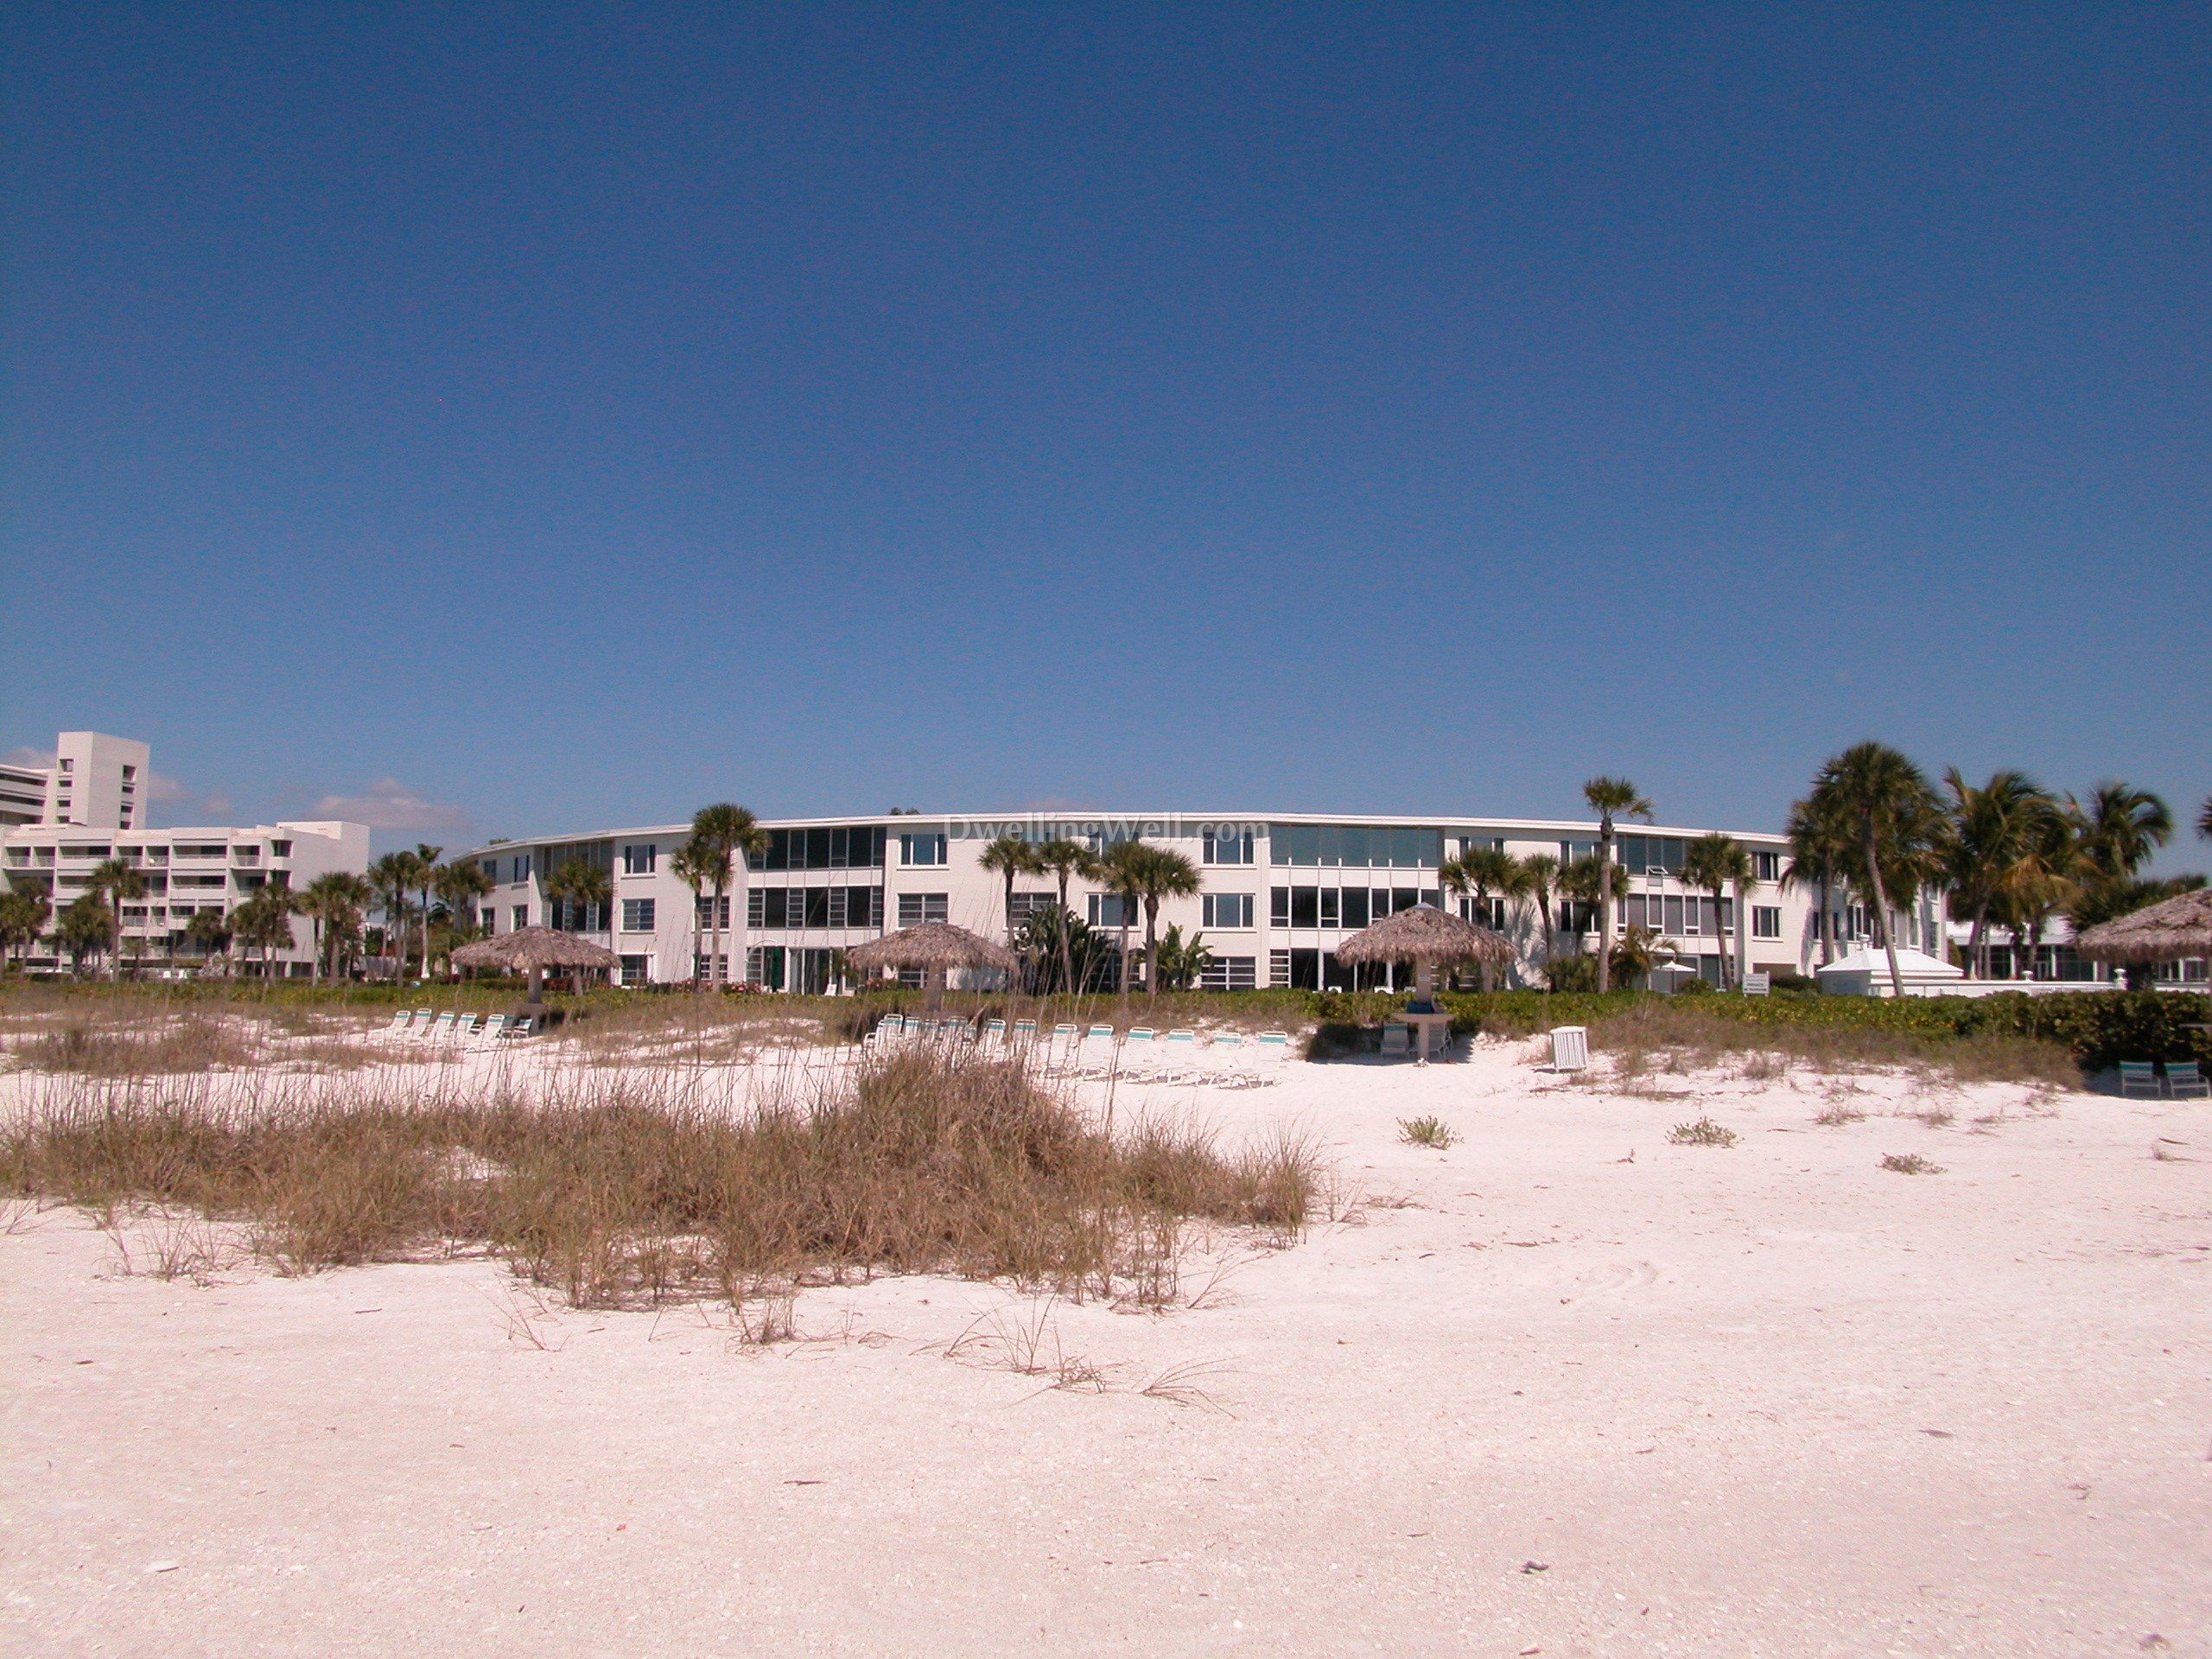 Sands Point Condos For Sale Longboat Key   Sands Point Condominiums